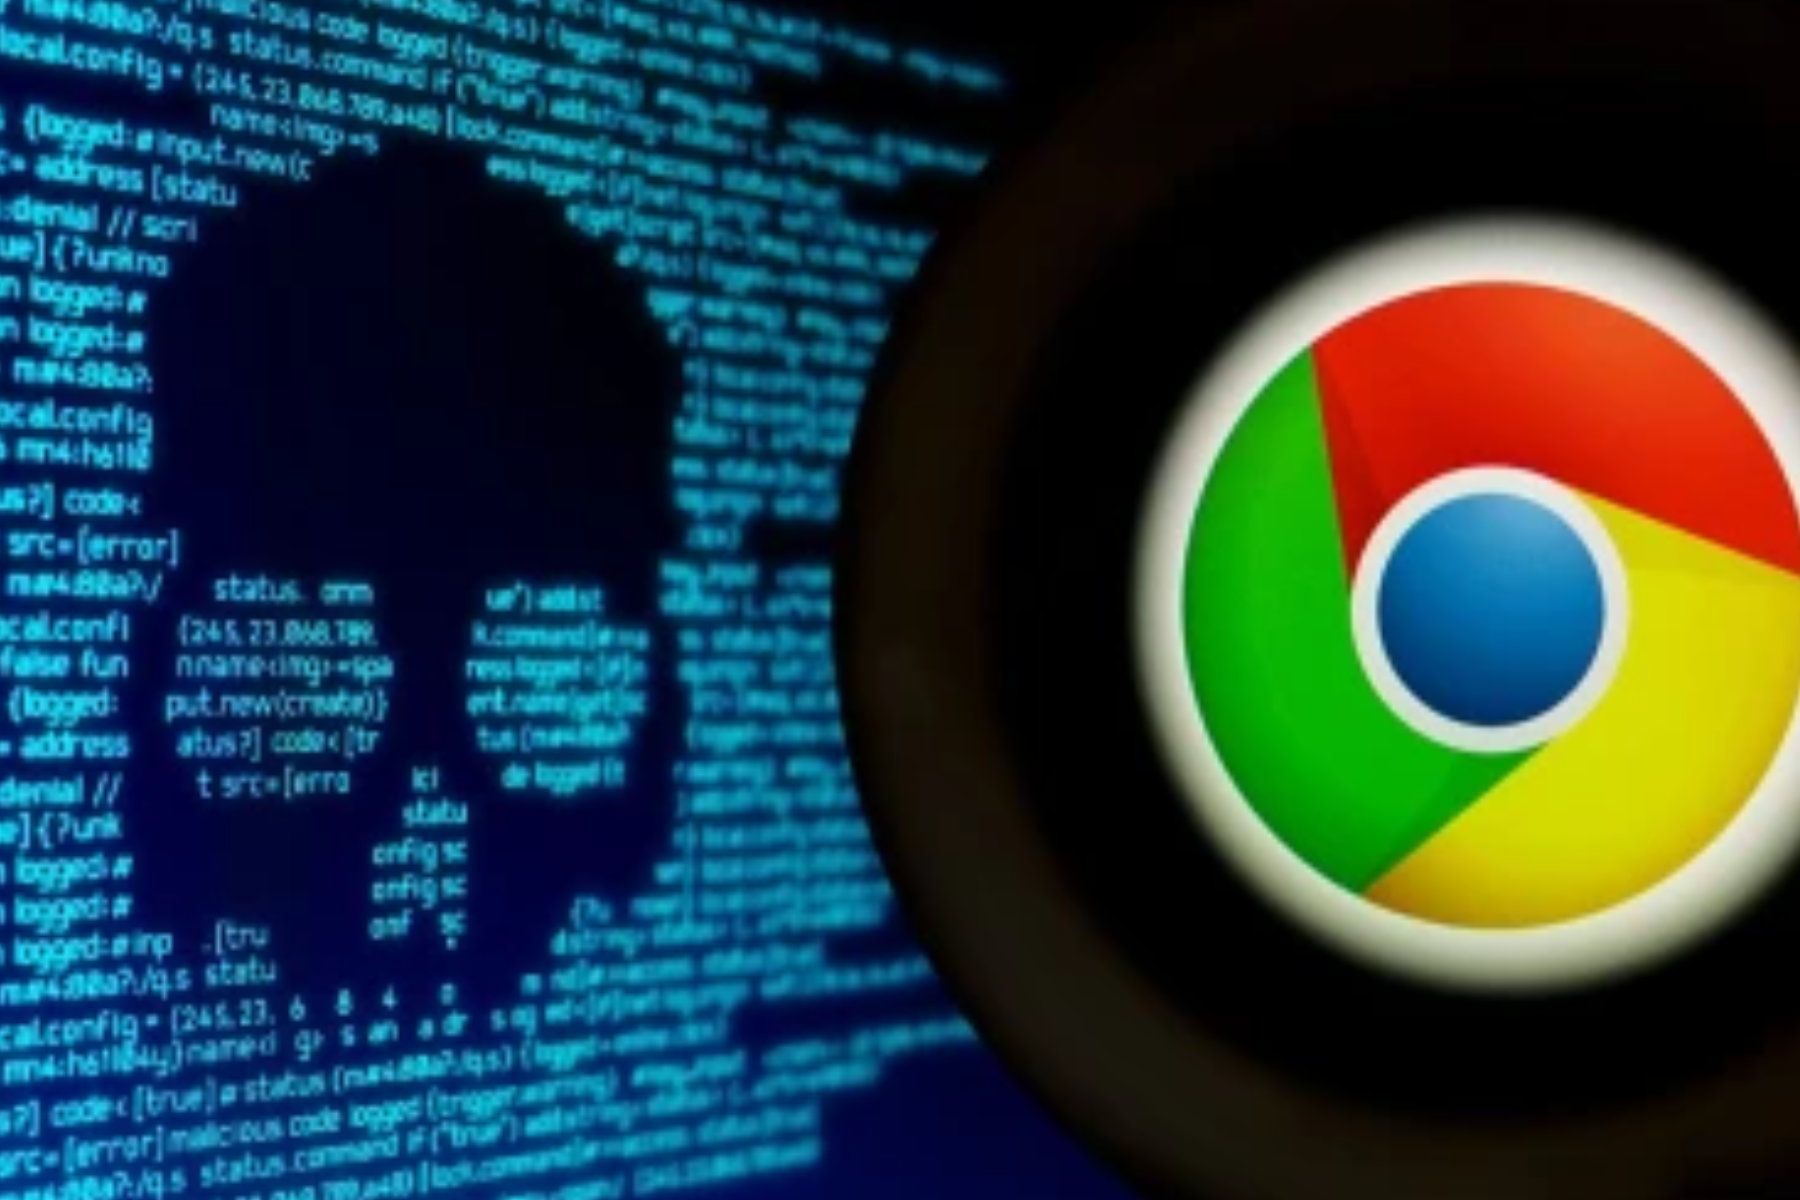 A code that generates a photo of a skull next to the Chrome logo